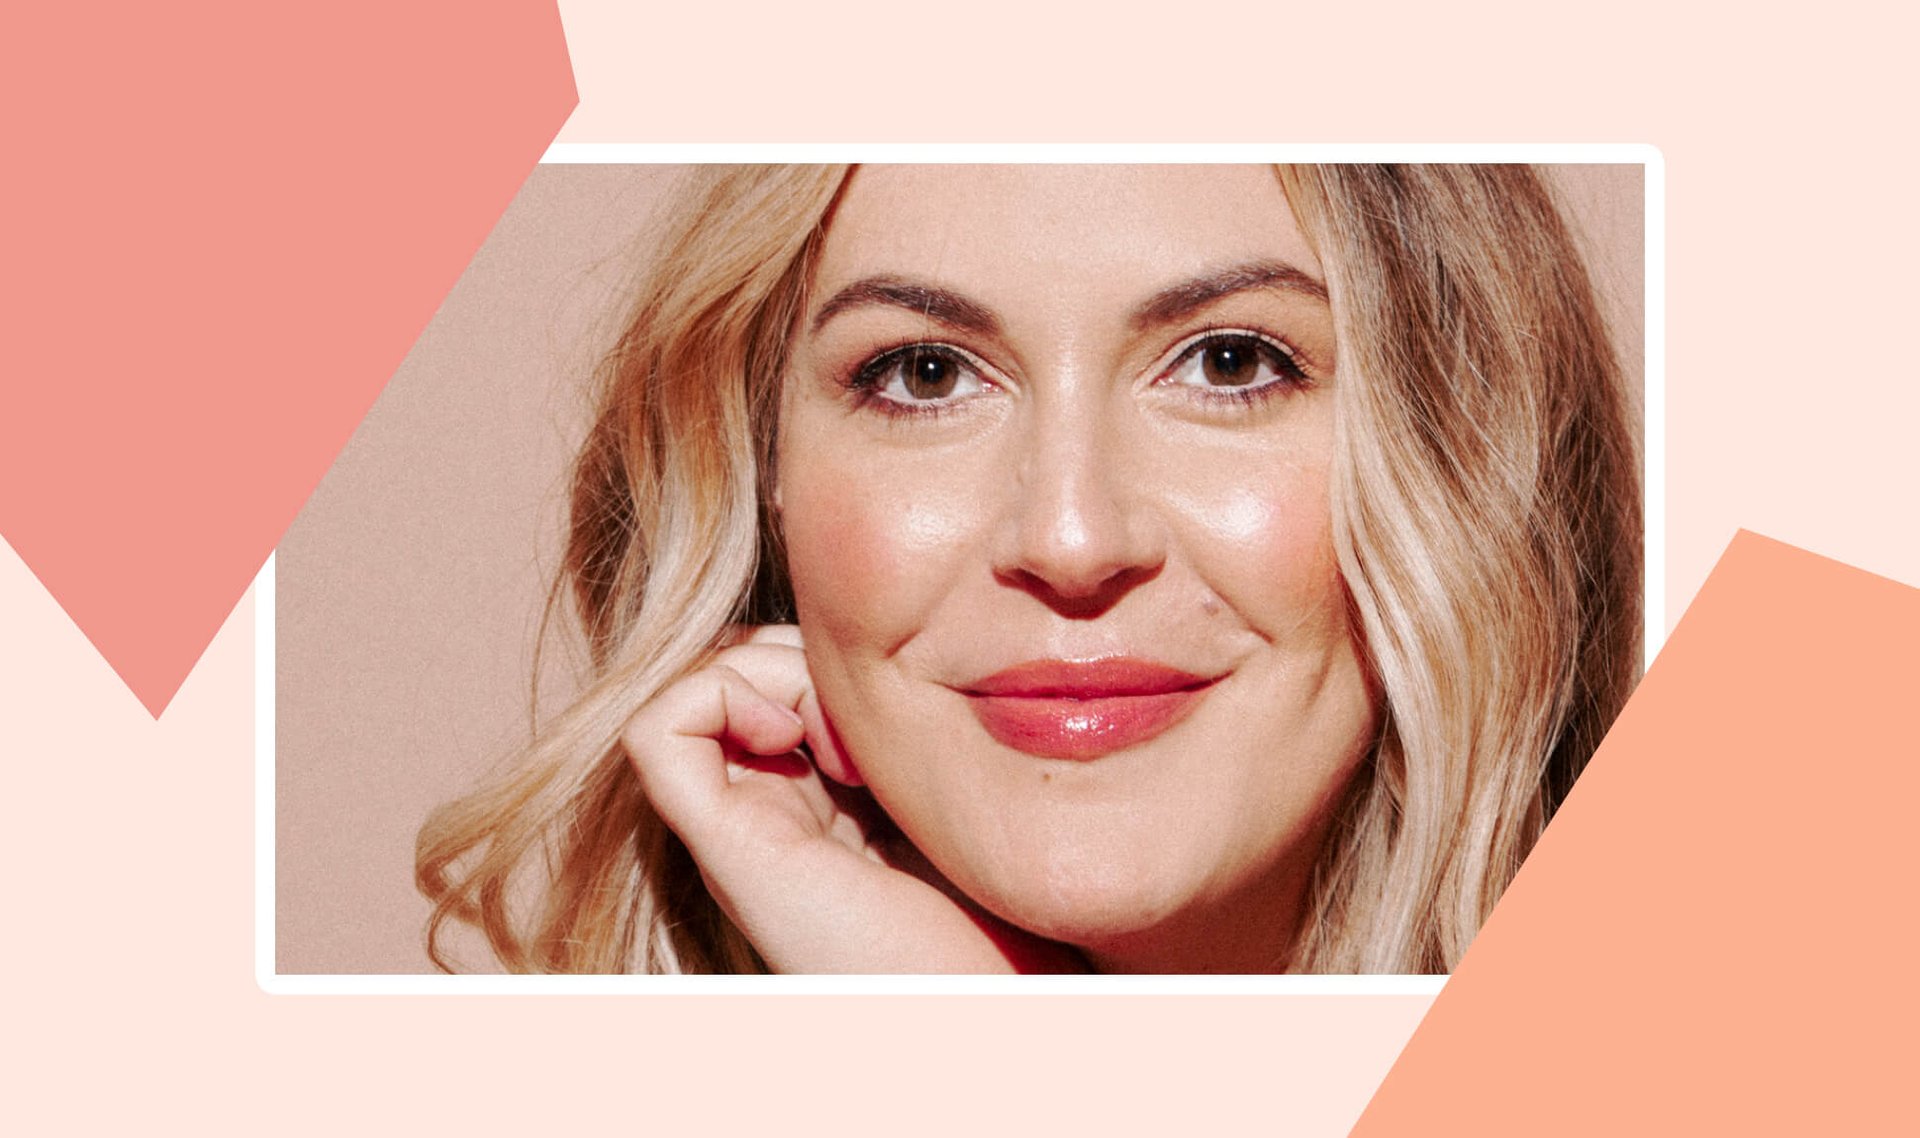 Career Diaries: How Glowbar Founder Rachel Liverman Adapted Her Business in Response to COVID-19